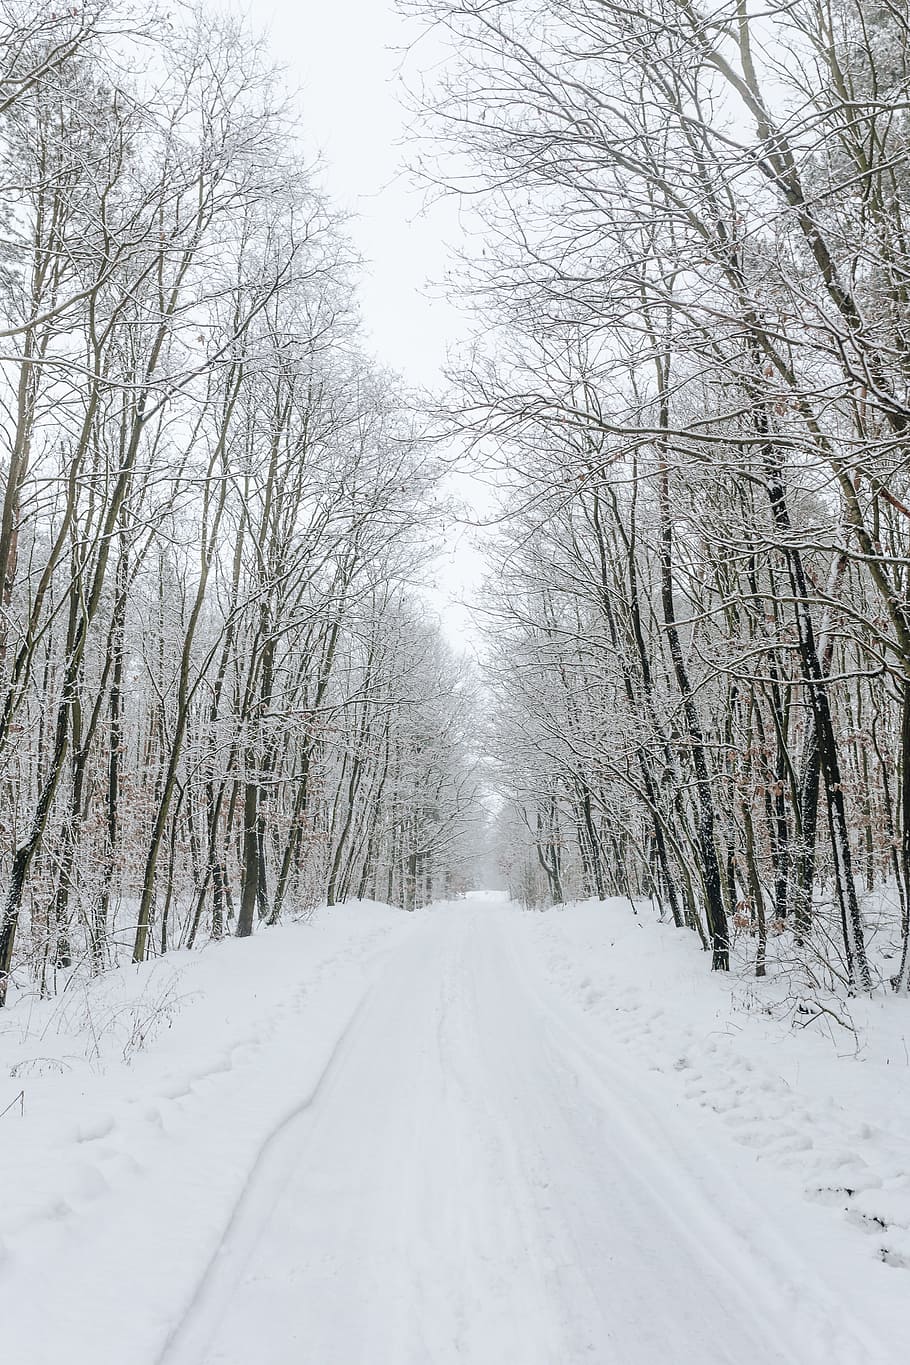 A Snowy Road In The Forest, Winter, White, Day, Path, - Snowy Road - HD Wallpaper 